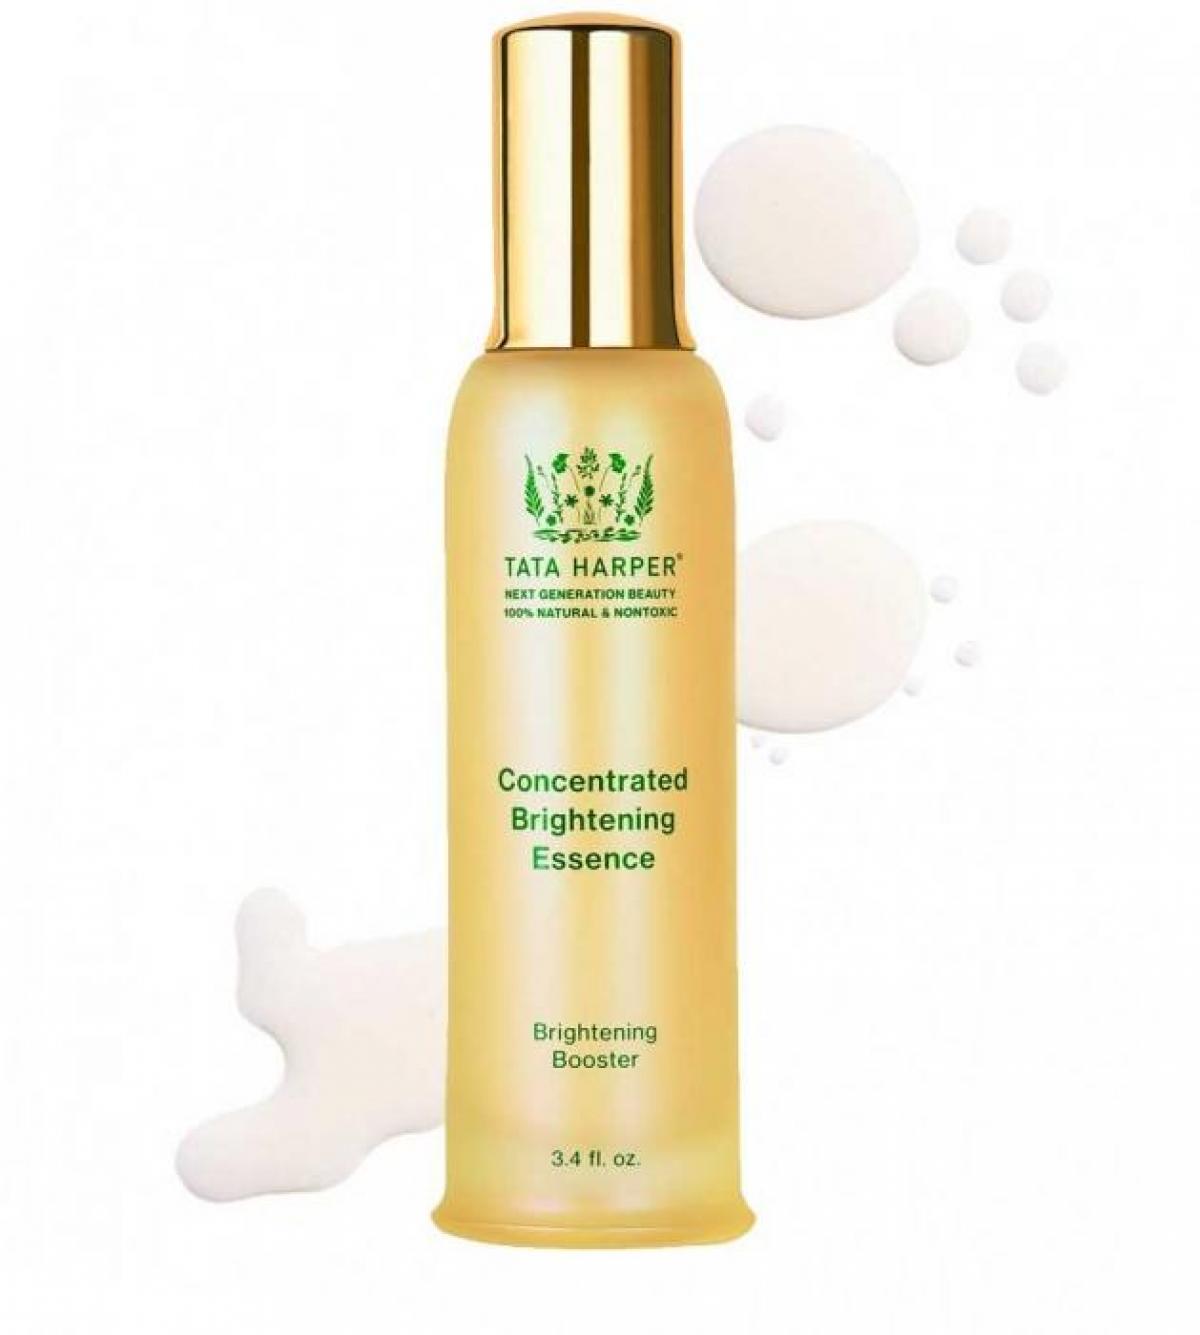 2. Concentrated Brightening Essence